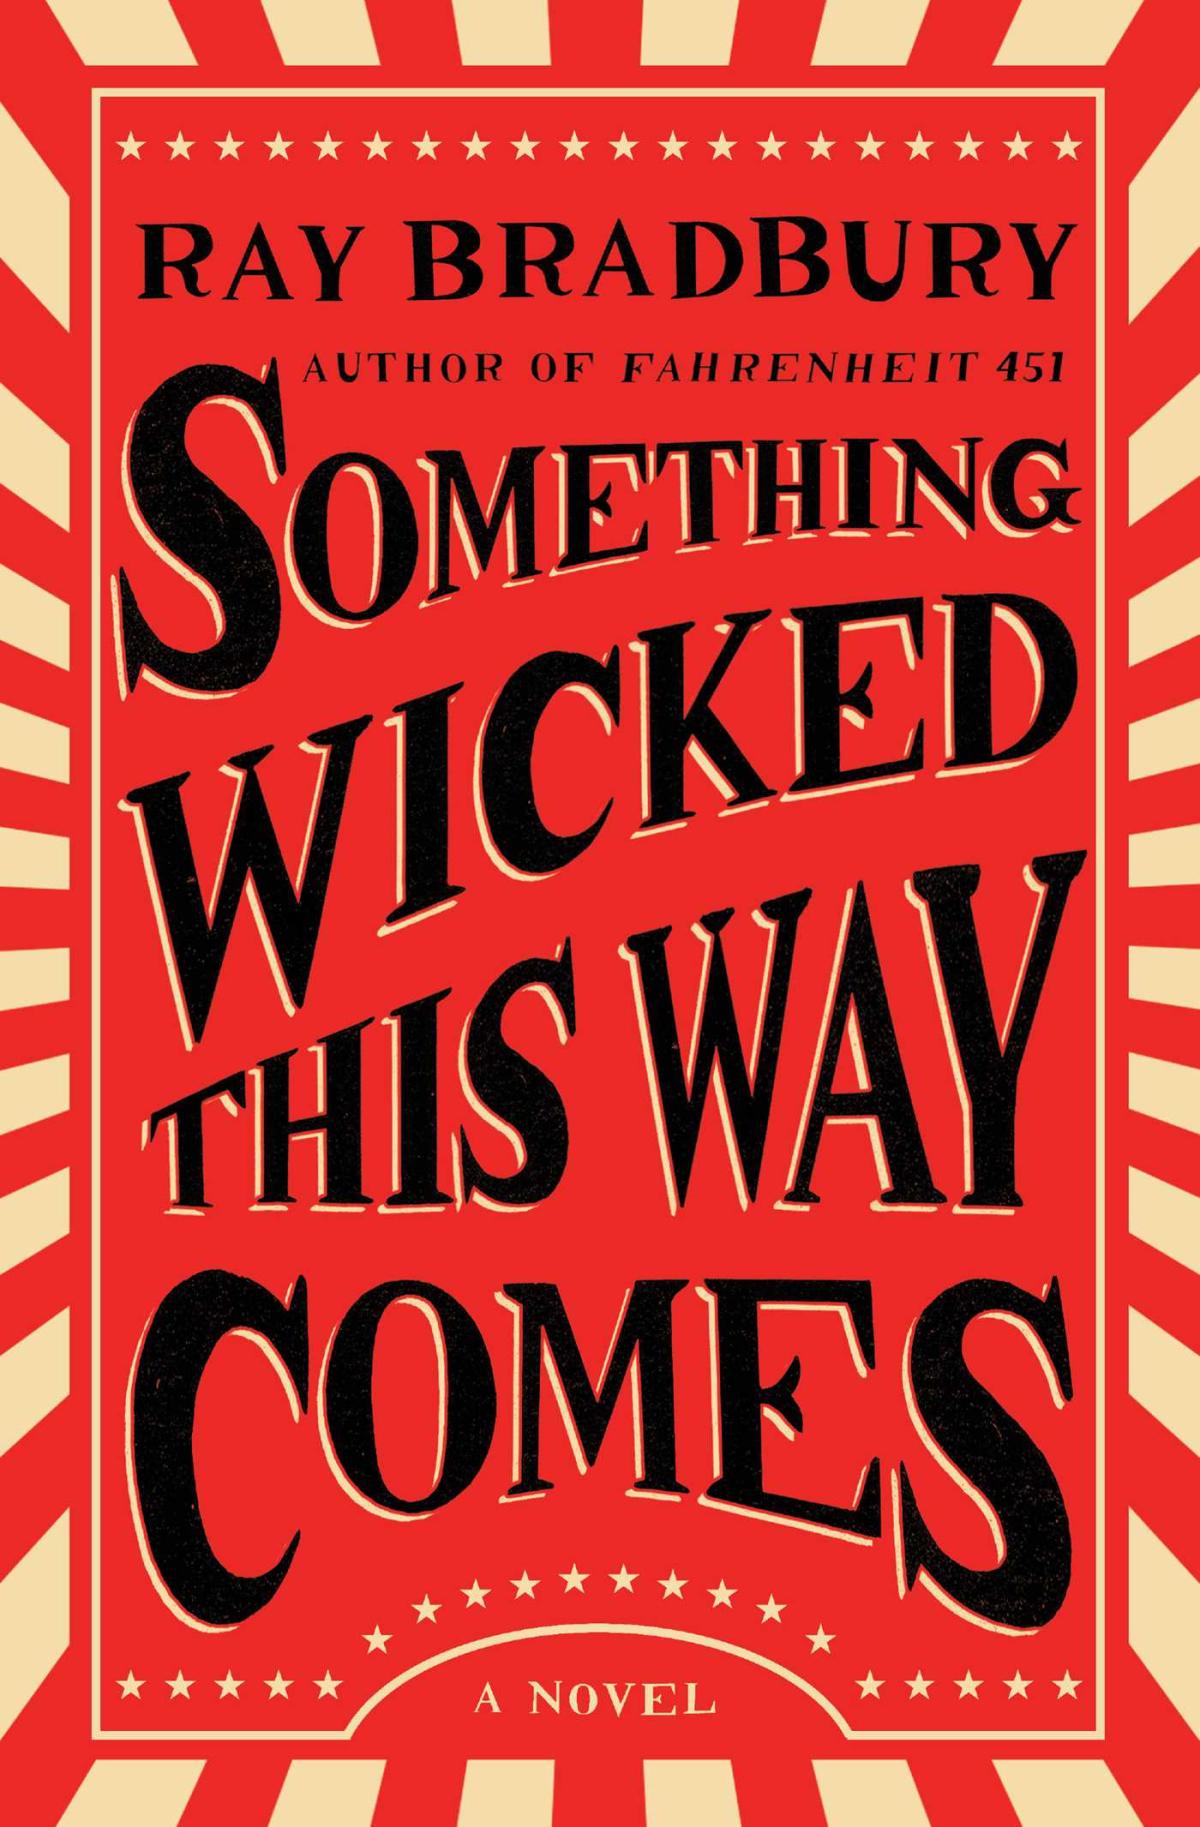 Book image of Something Wicked this Way Comes